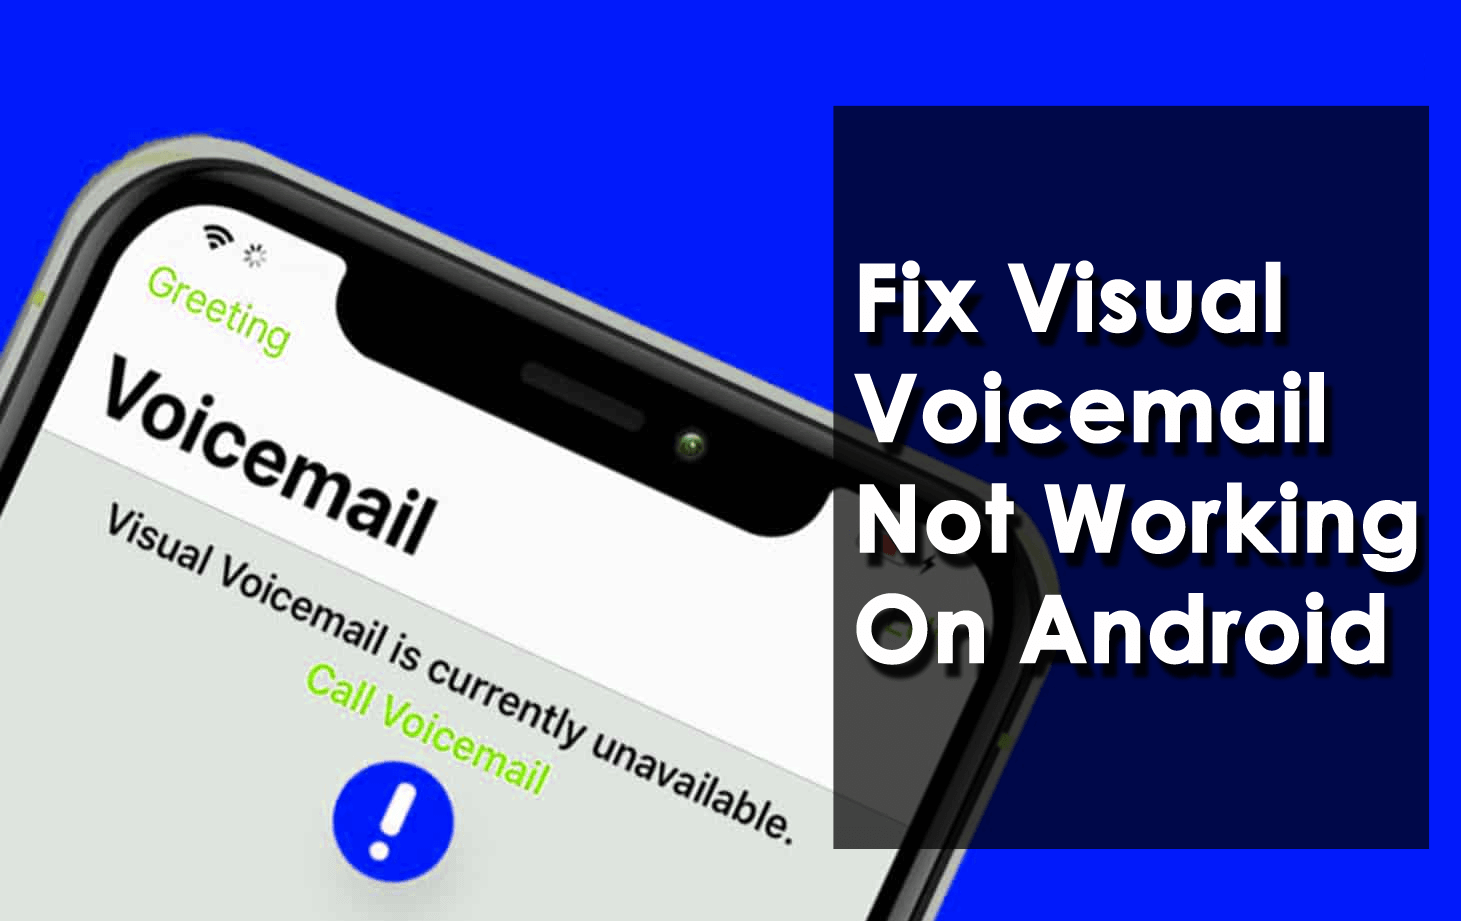 Fix Visual Voicemail Not Working On Android